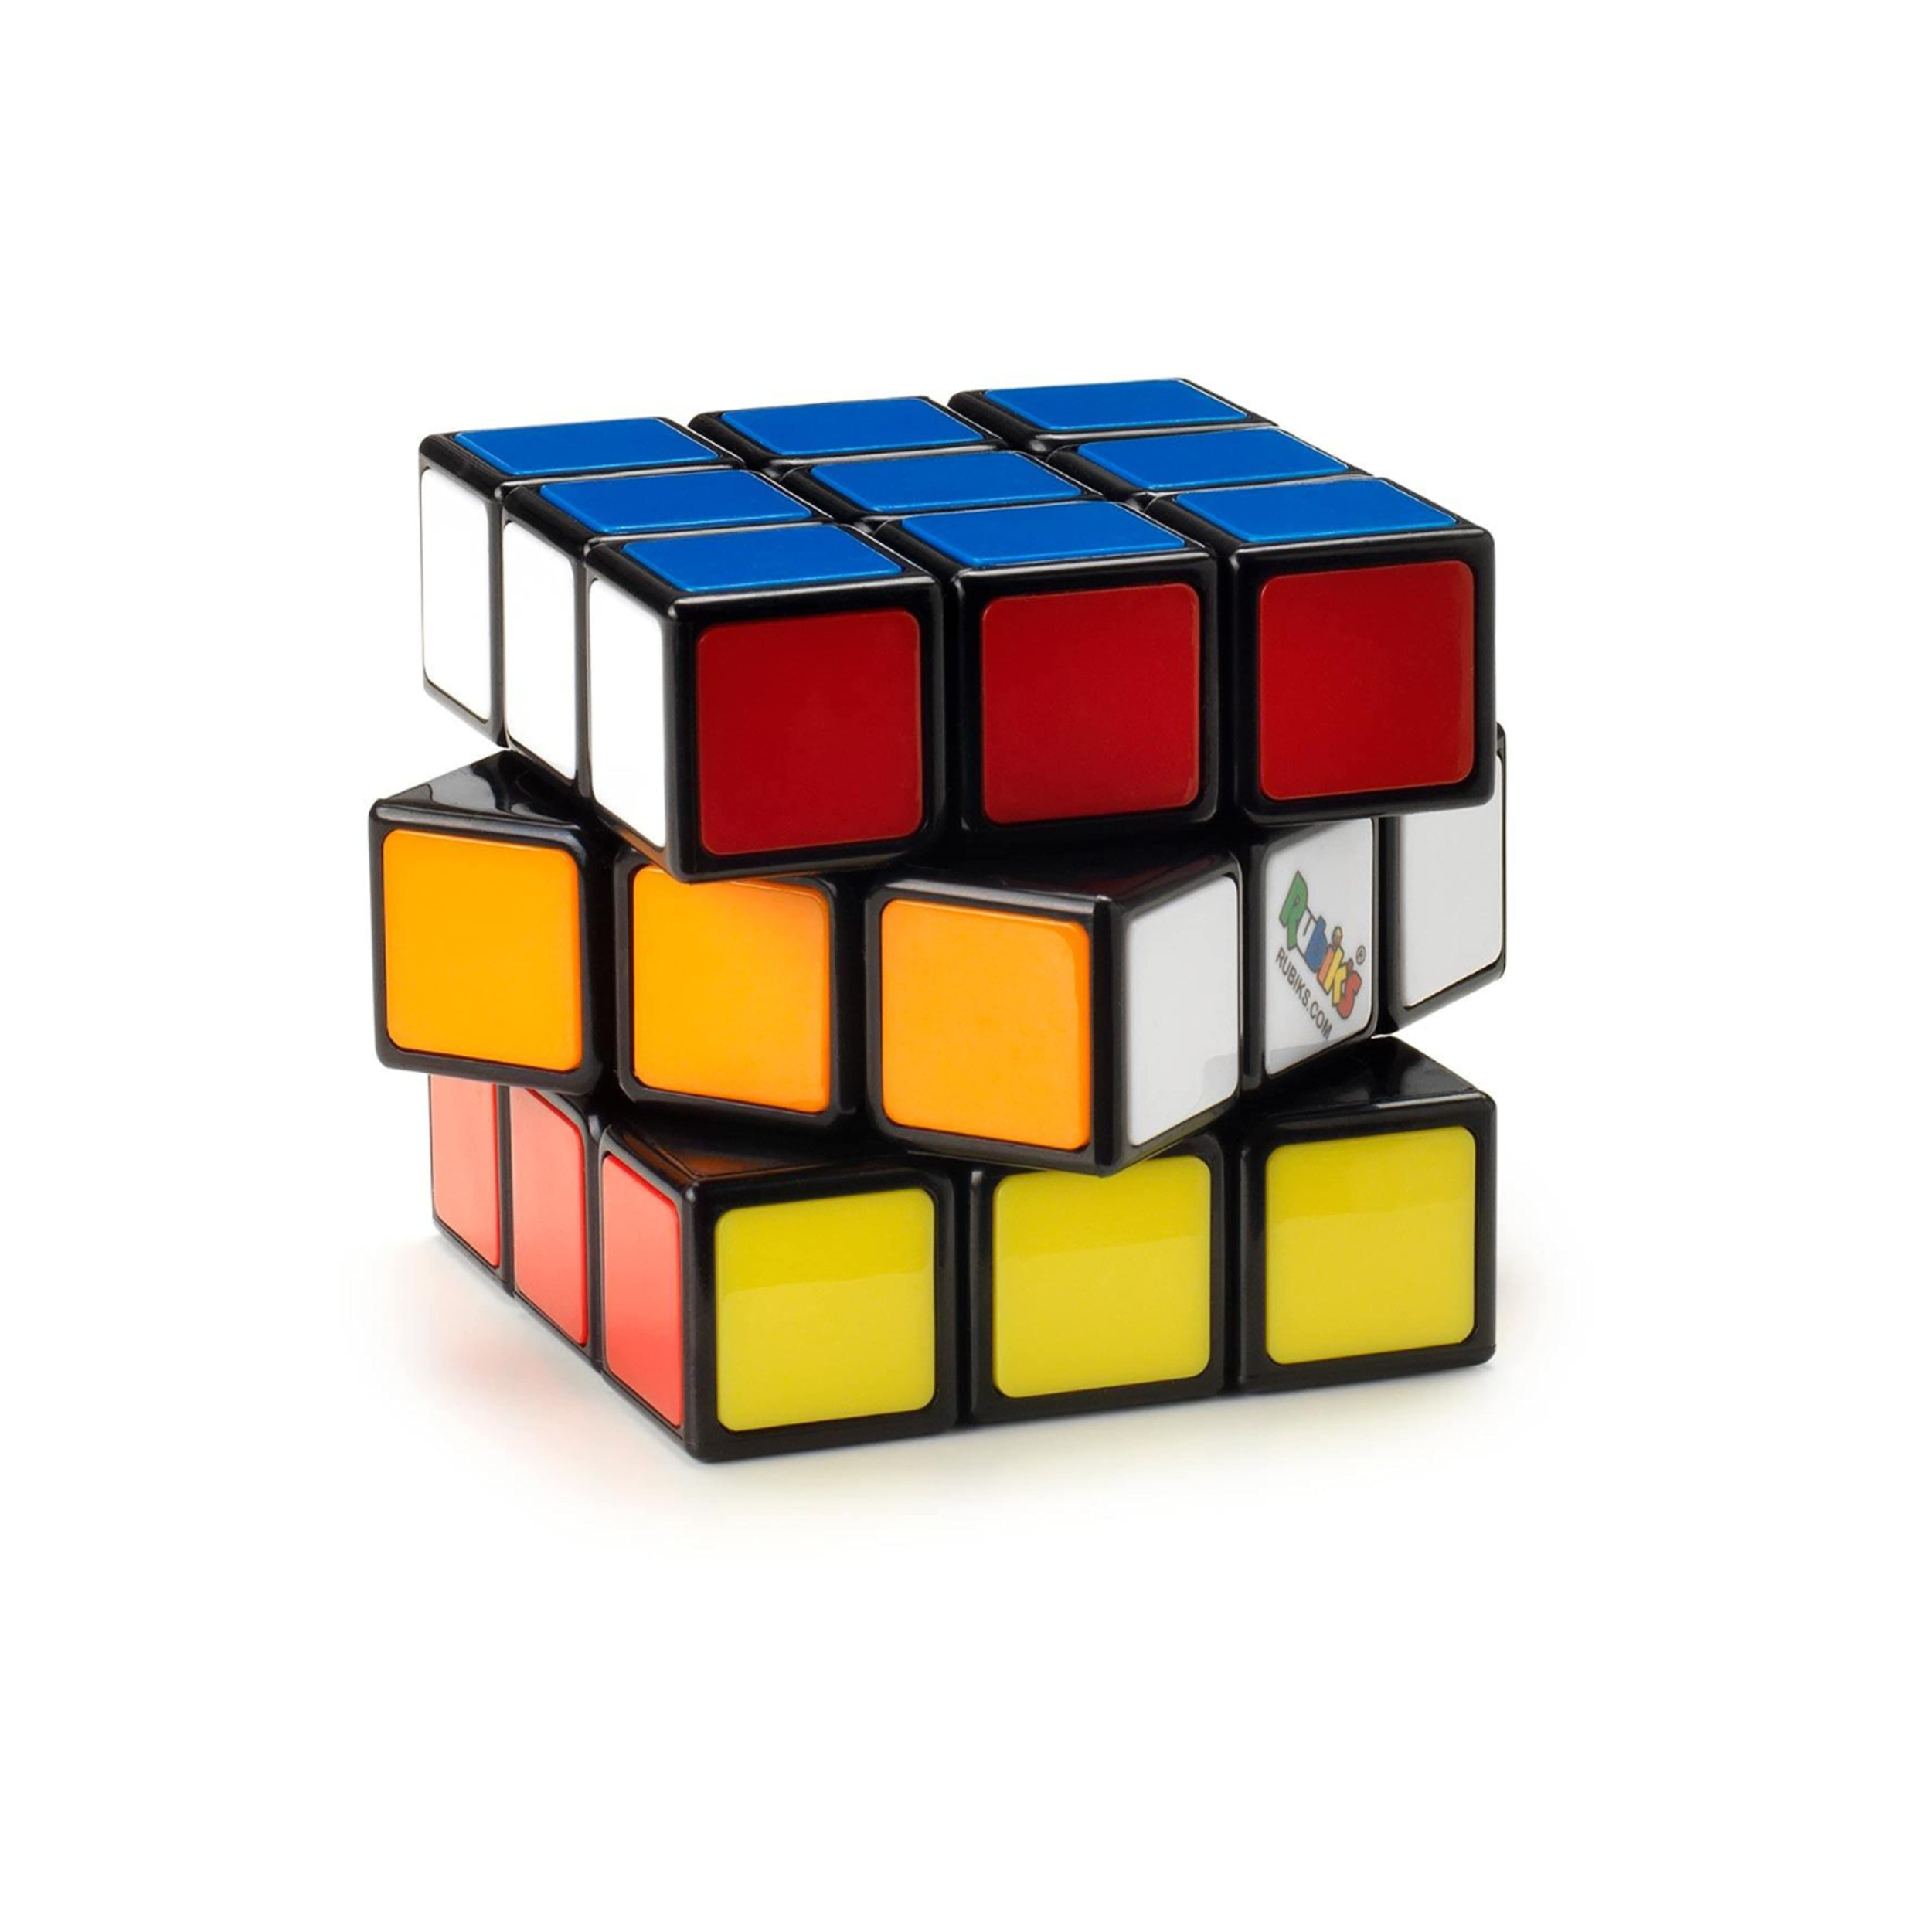 Rubik's Cube, The Original 3x3 Color-Matching Puzzle Classic  Problem-Solving Challenging Brain Teaser Fidget Toy, for Adults & Kids Ages  8 and up – Shop Spin Master